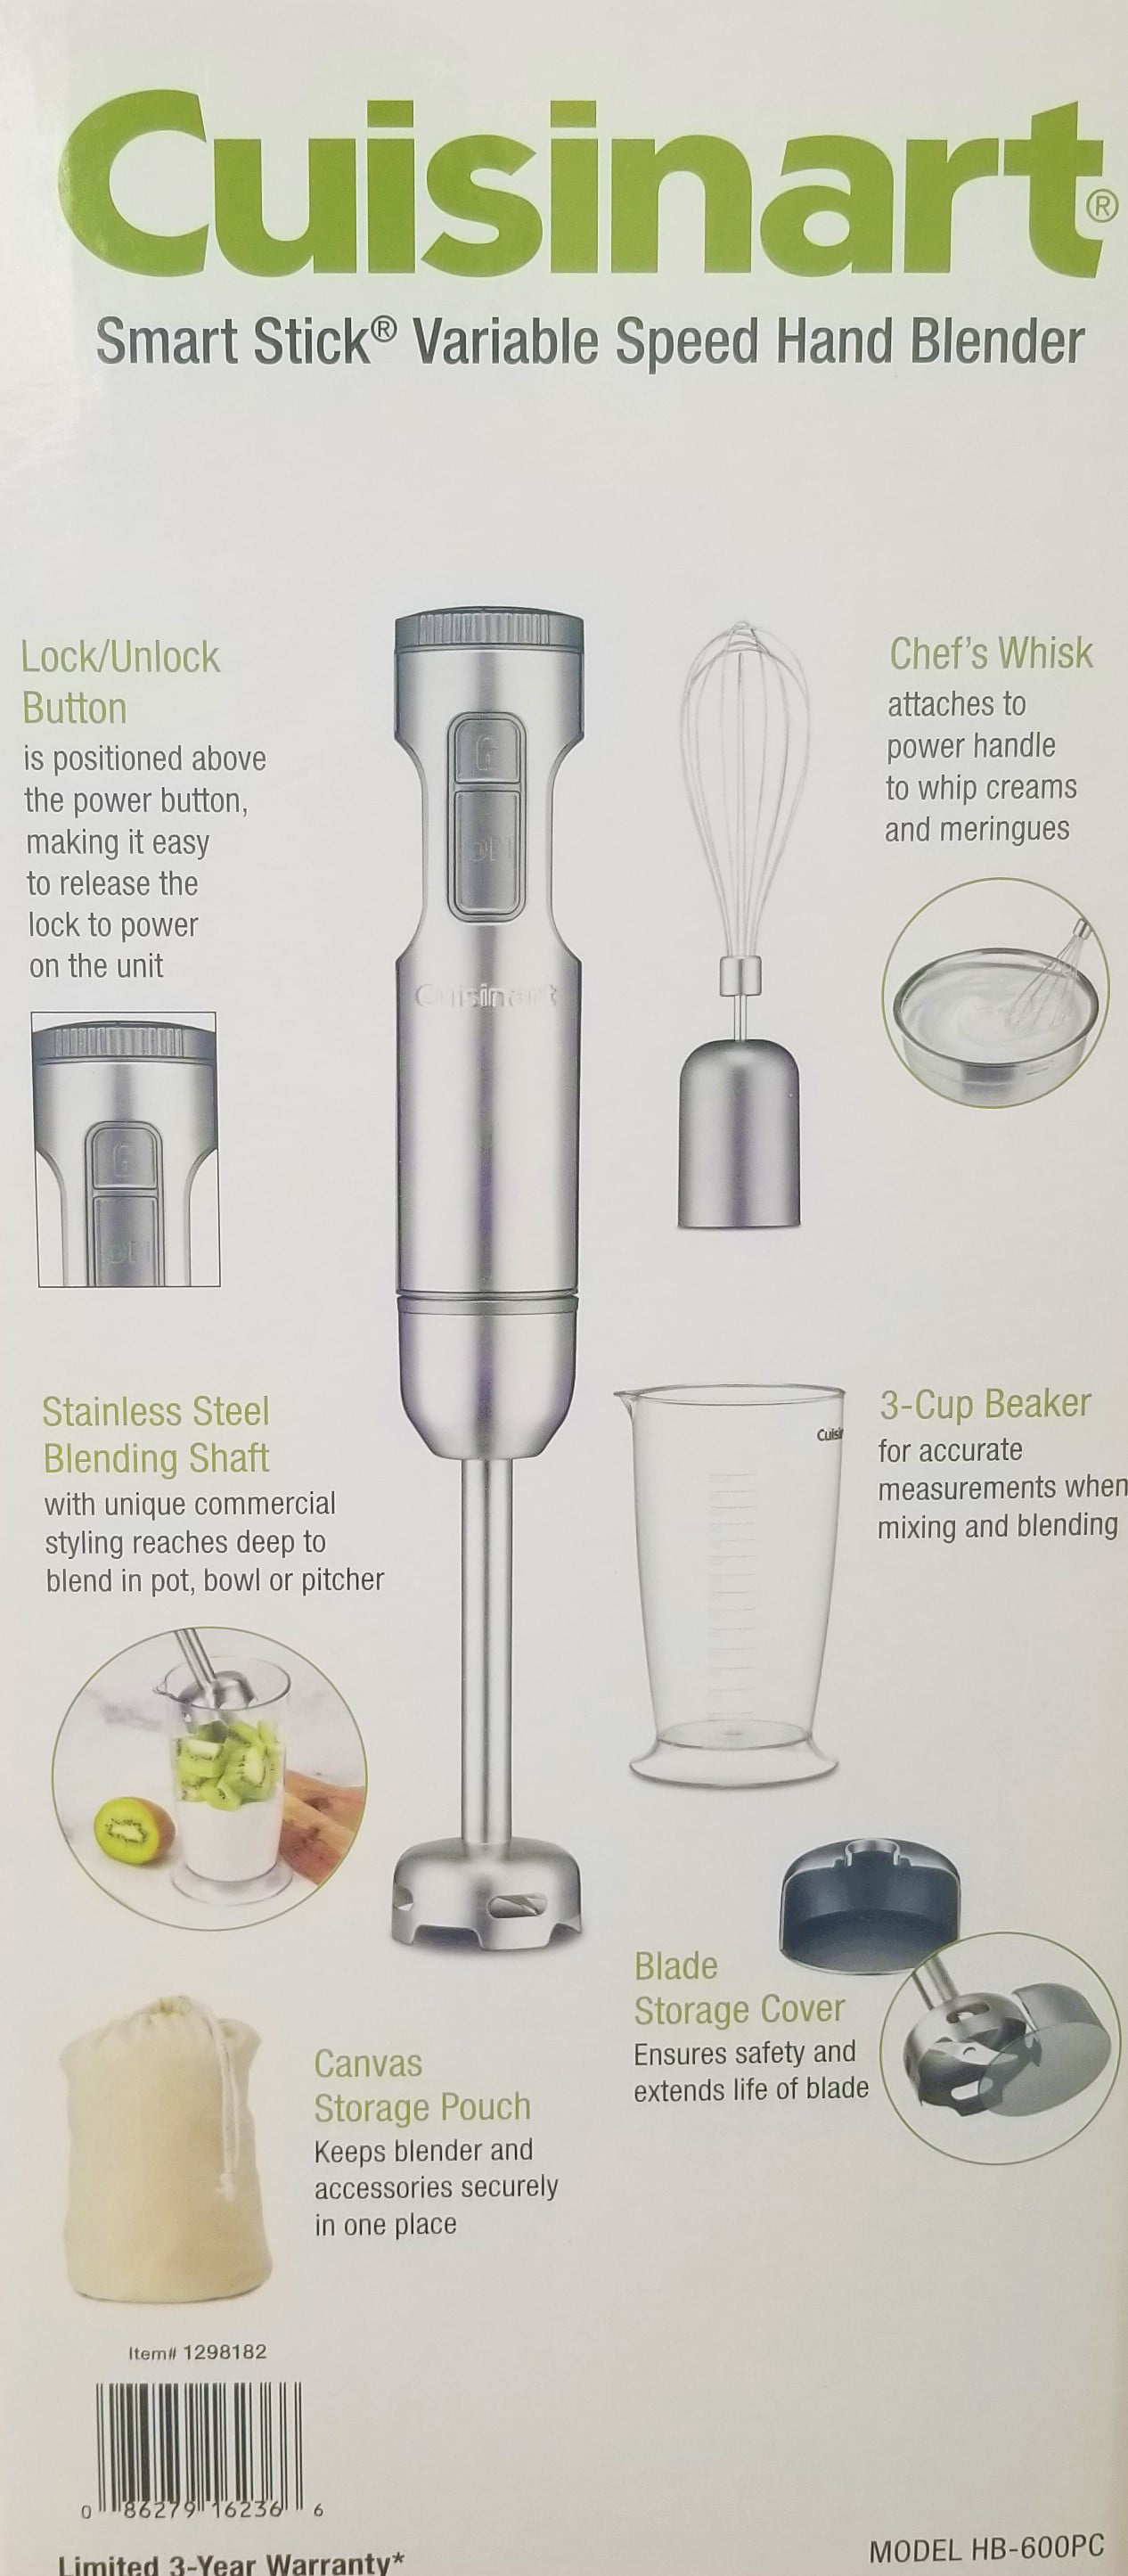 Goodful by Cuisinart Electric Hand Blender & Mixer, Goodful Collection, 400  Watts of Power, HB400GF